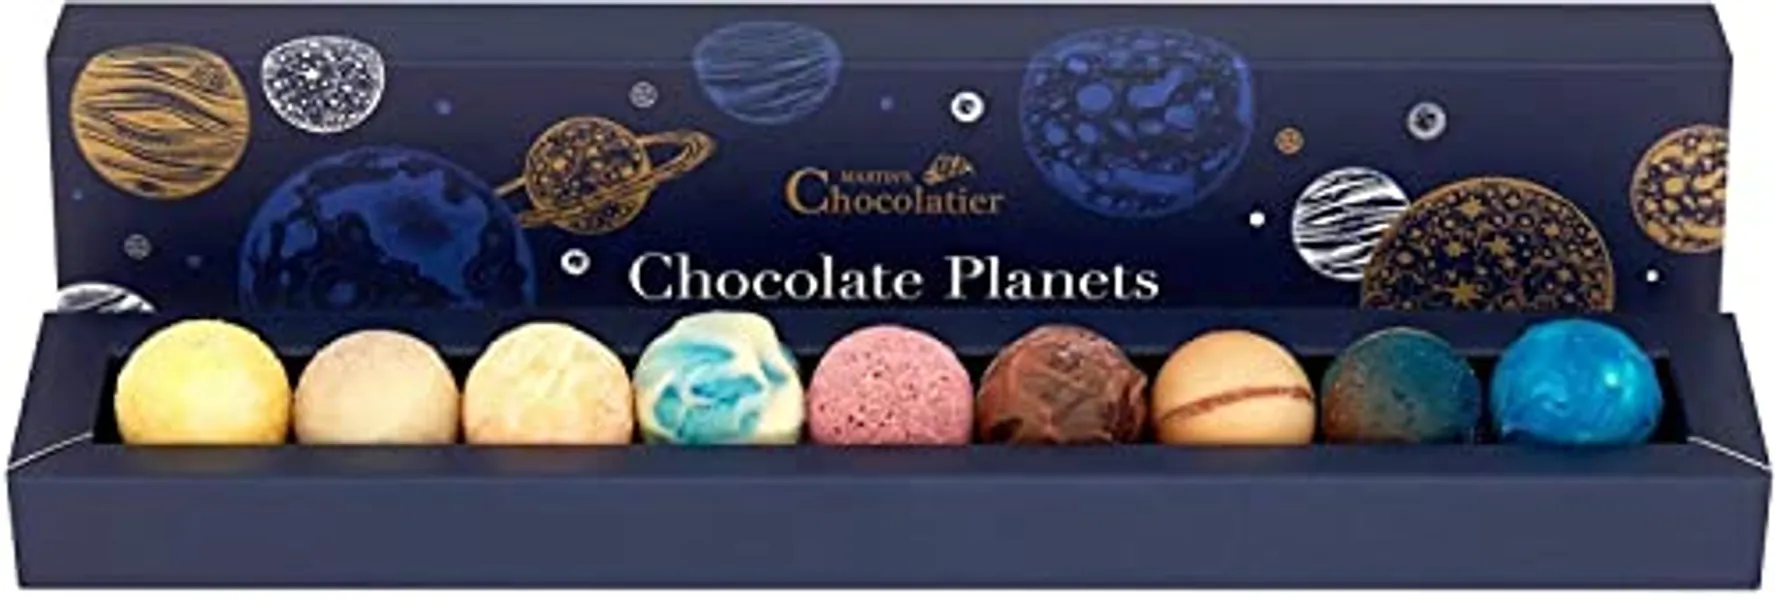 Martin’s Chocolatier Chocolate Planets | Luxury Handmade Chocolate Gift Box | 9 Belgian Truffles | Assorted Flavours | Ideal Present for Science Lovers | Pack of 1 (107g) - Chocolate - 9 Count (Pack of 1)